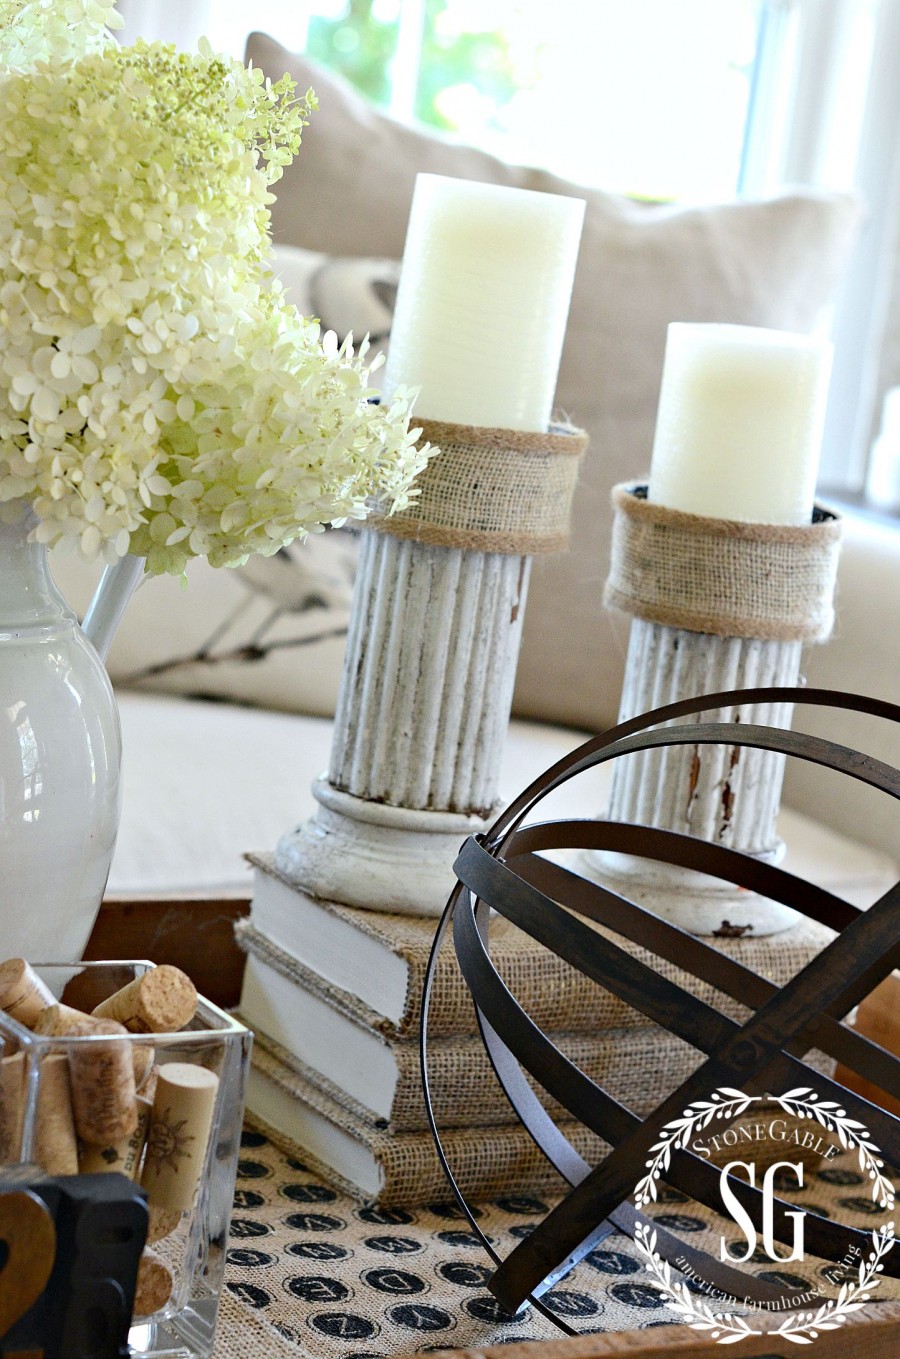 5 TIPS FOR MIXING METALS- Metallics come in so many colors and finishes. Learn how to mix them to make your home shine!